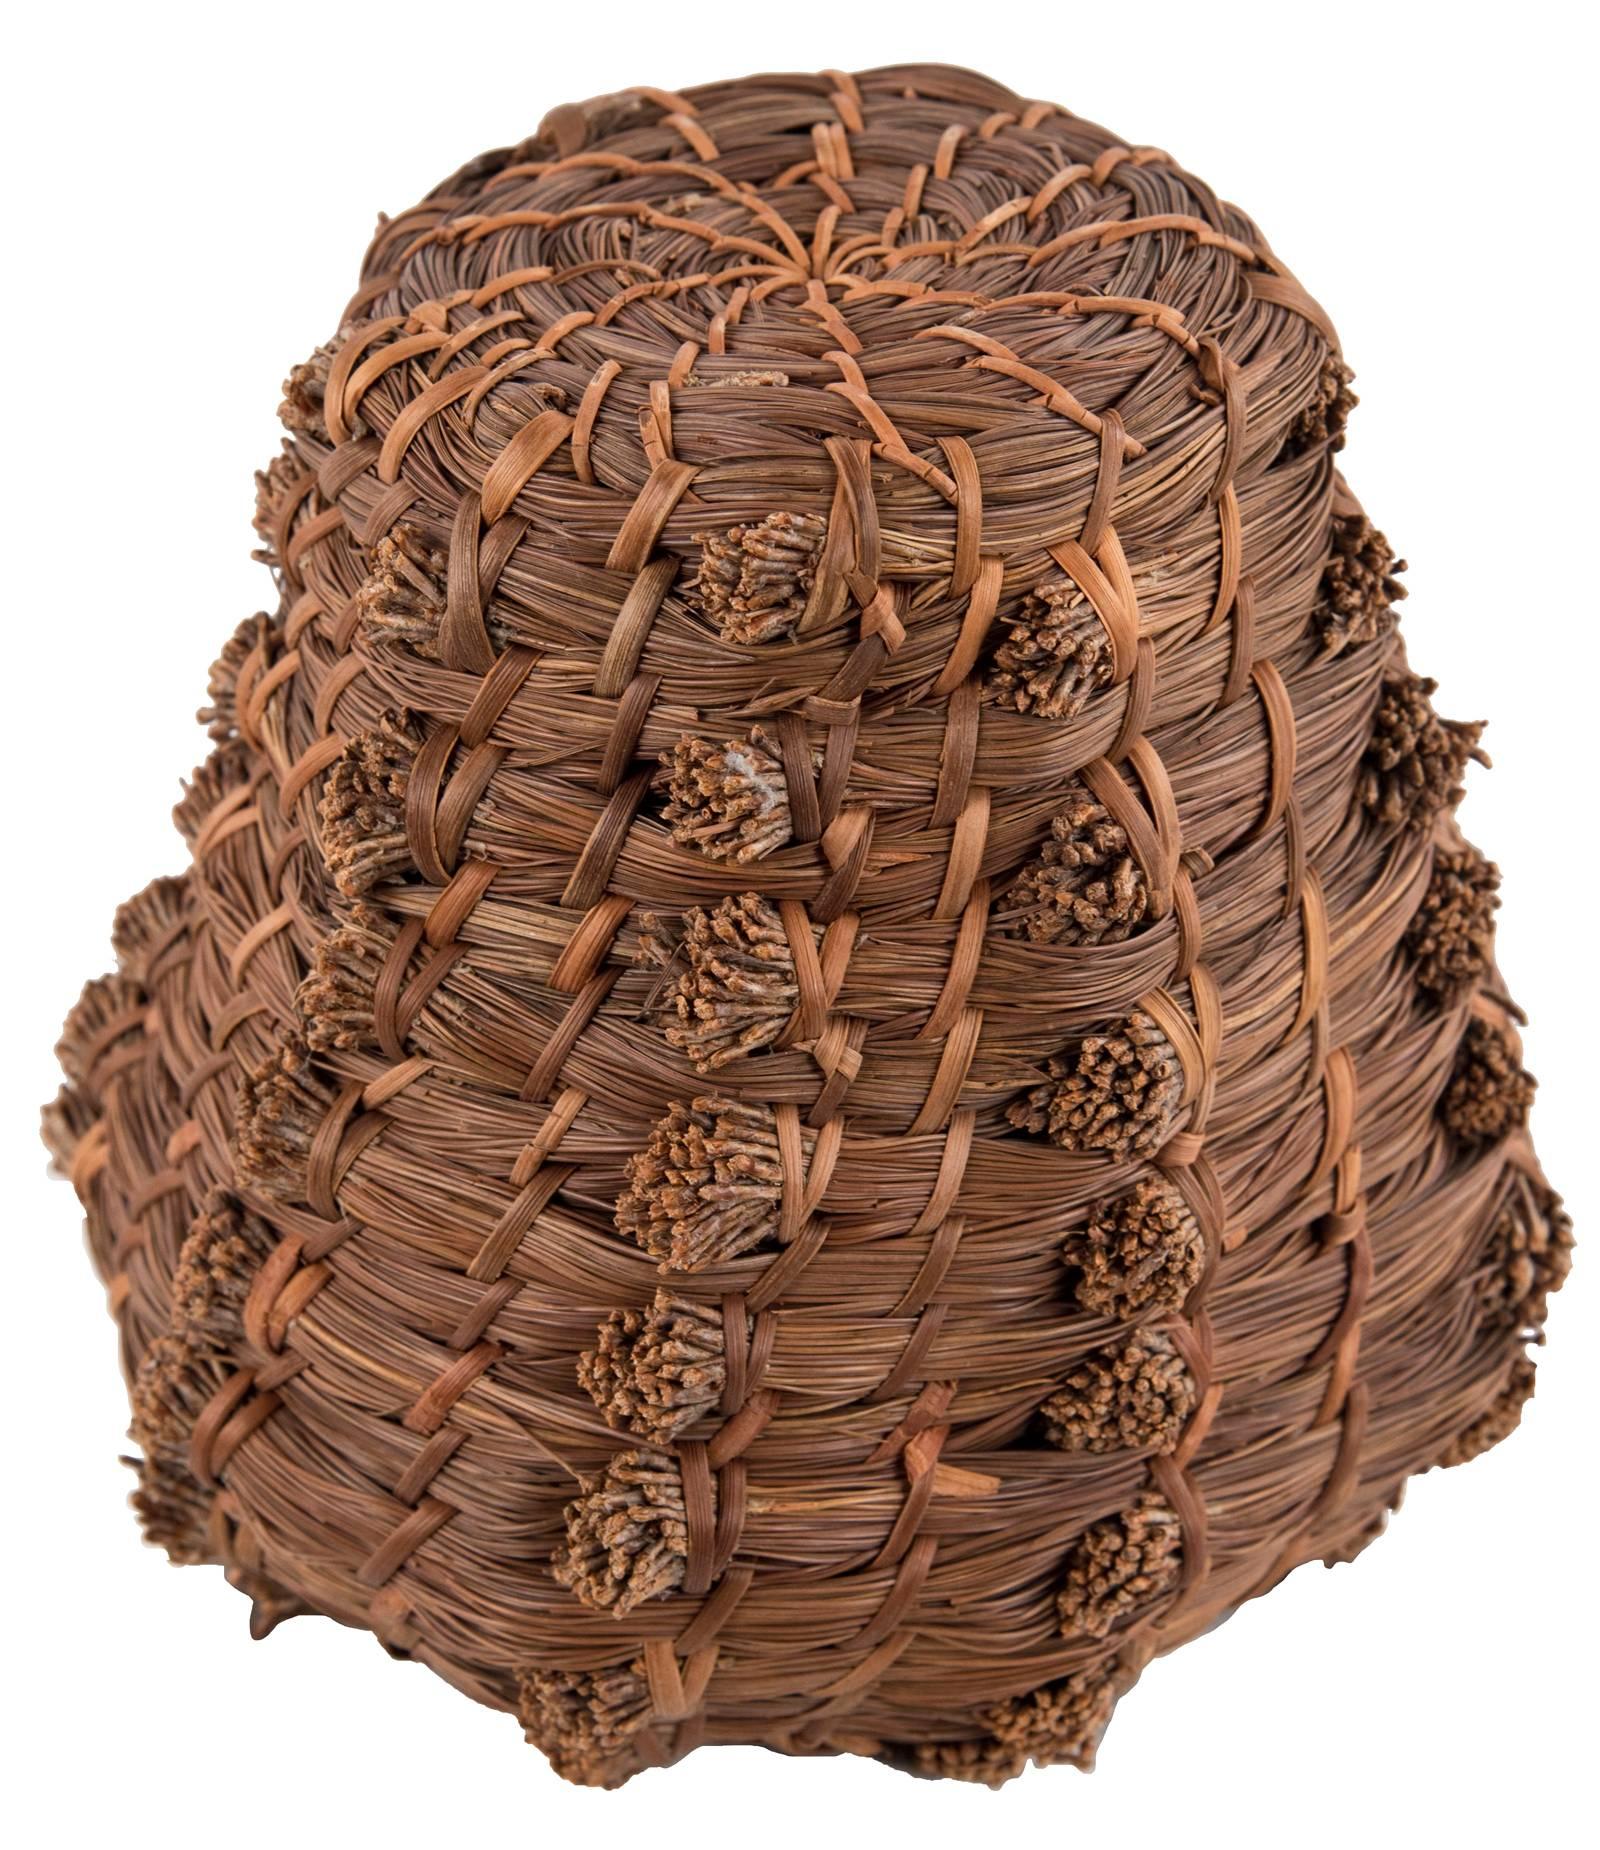 pine needle baskets for sale